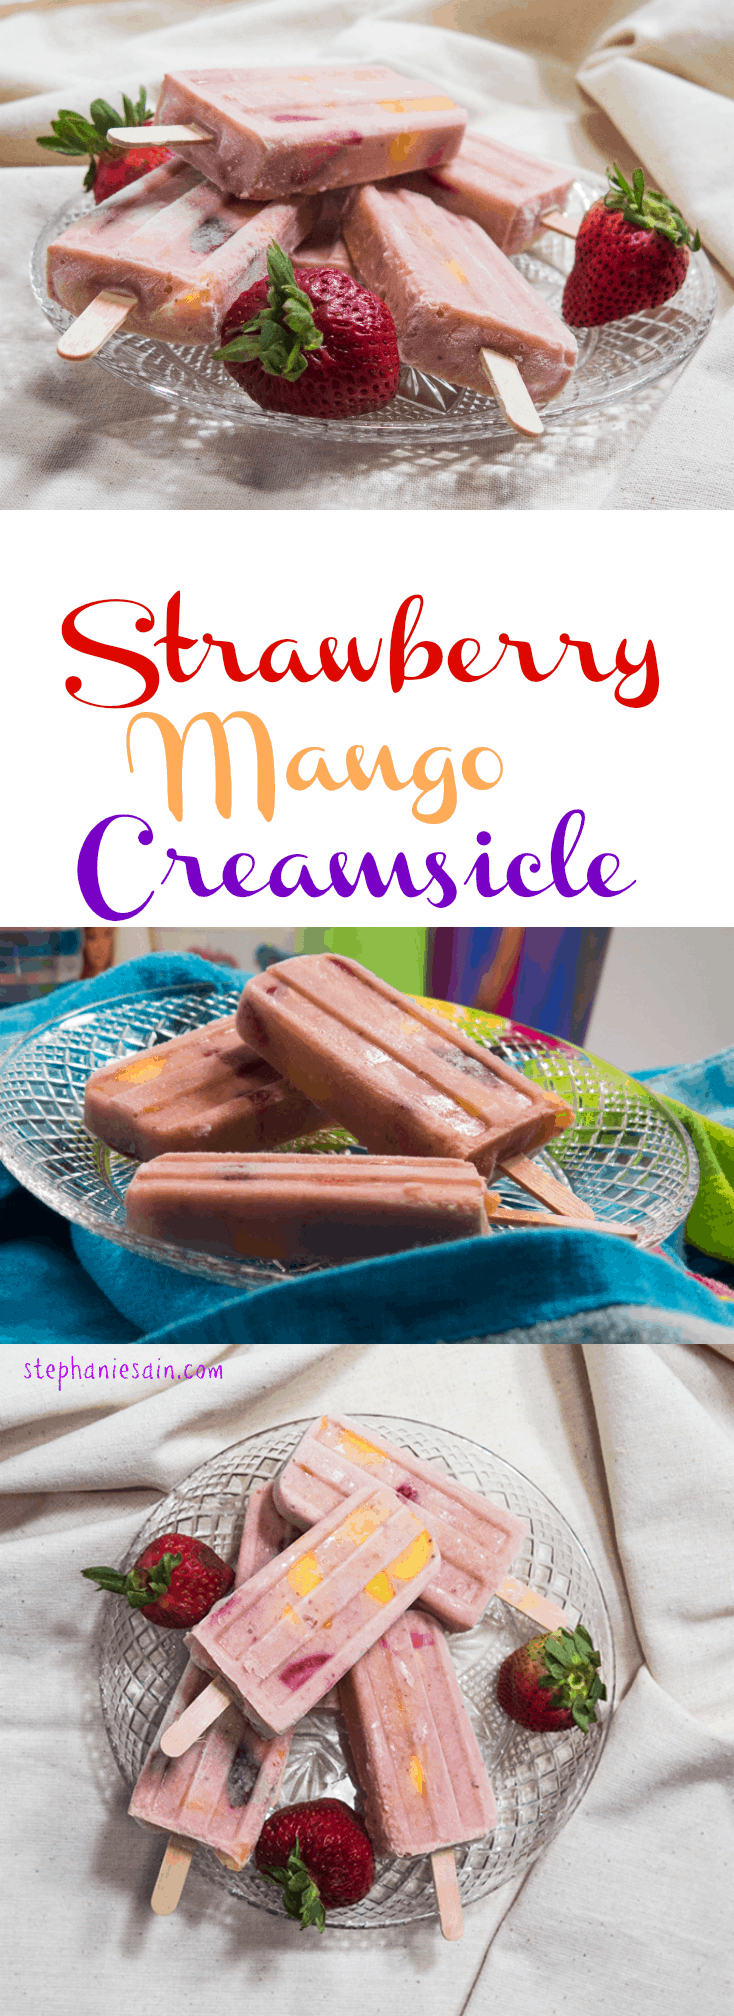 Strawberry Mango Creamsicle is a healthier tasty creamsicle made with only three ingredients and no added sugar.